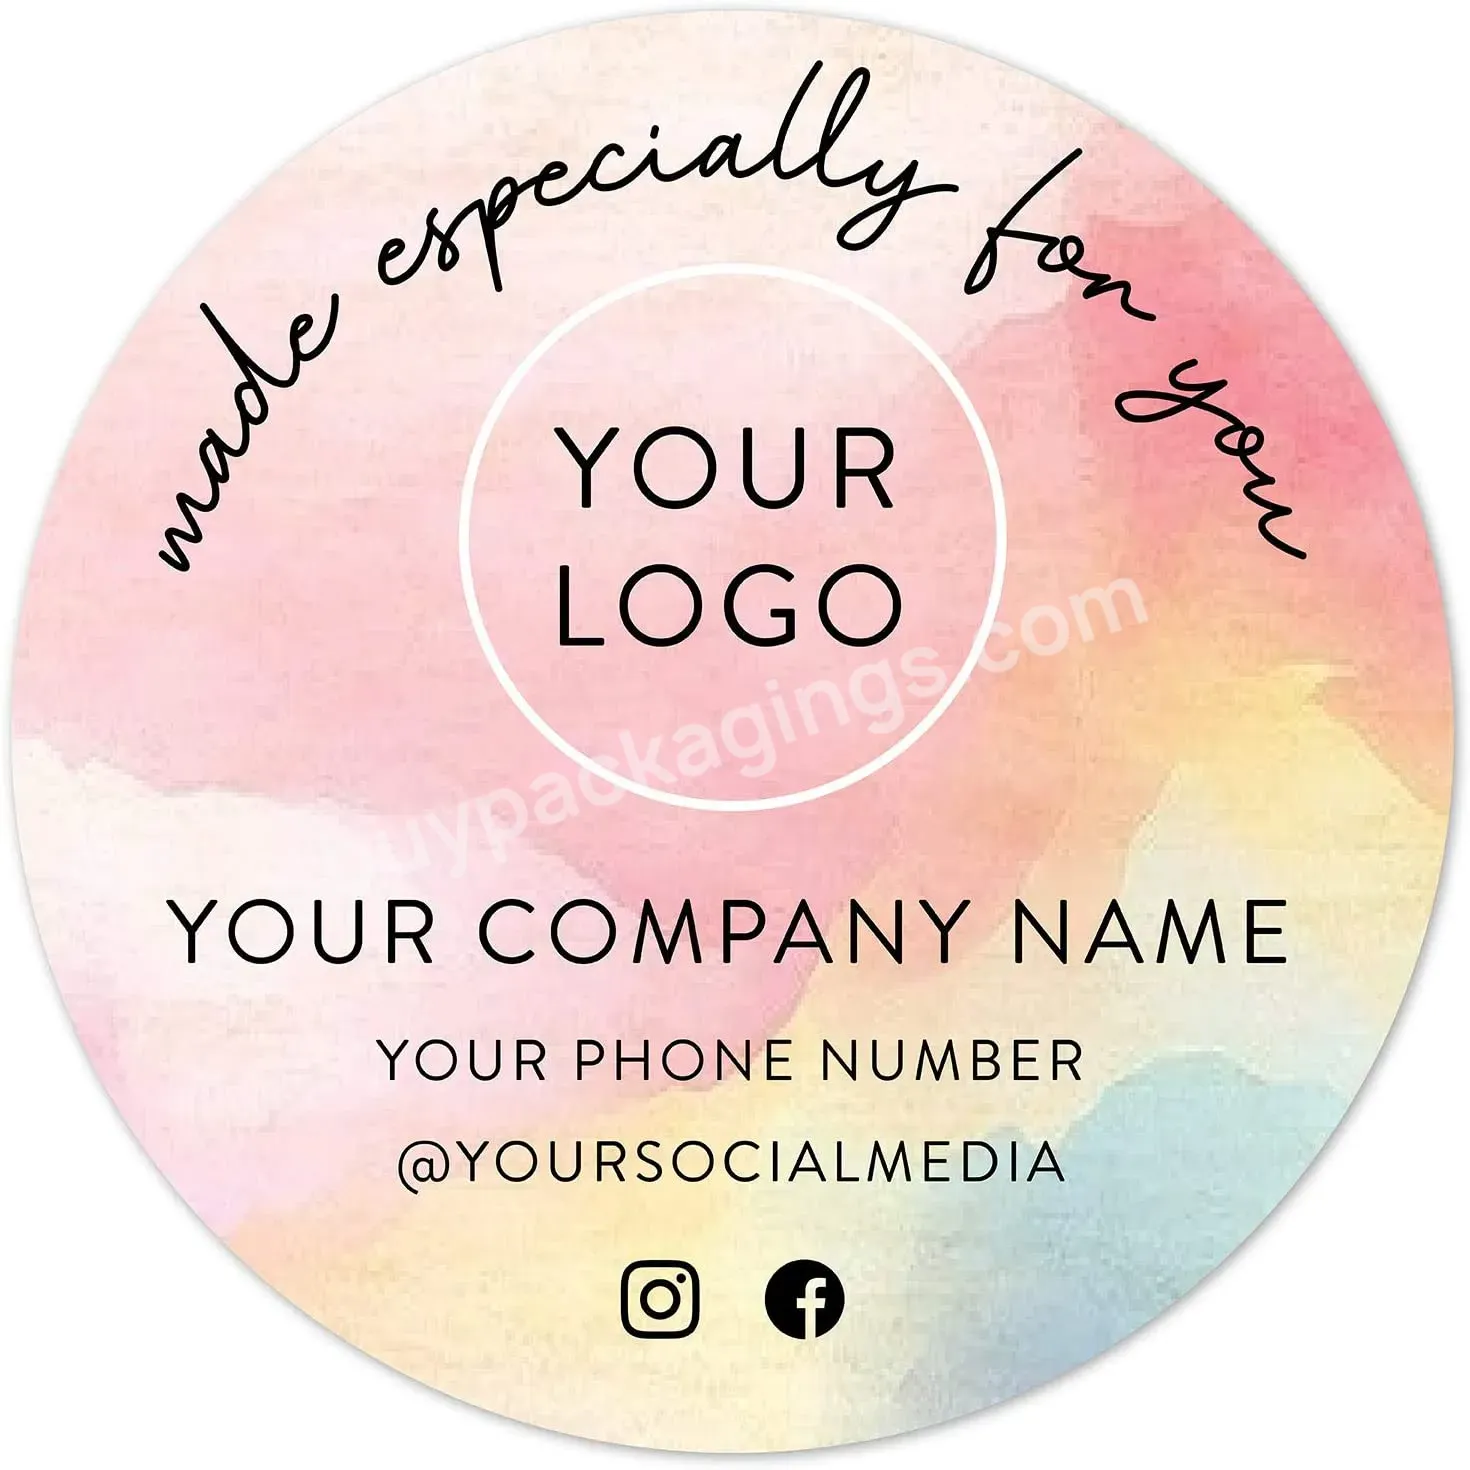 Custom Vinyl Stickers - Label Stickers For Small Business Logo - Personalized Logo Labels For Handmade - Buy Product Label Stickers Custom Printing,Customized Sticker Roll Logo Label,Custom Label Stickers.